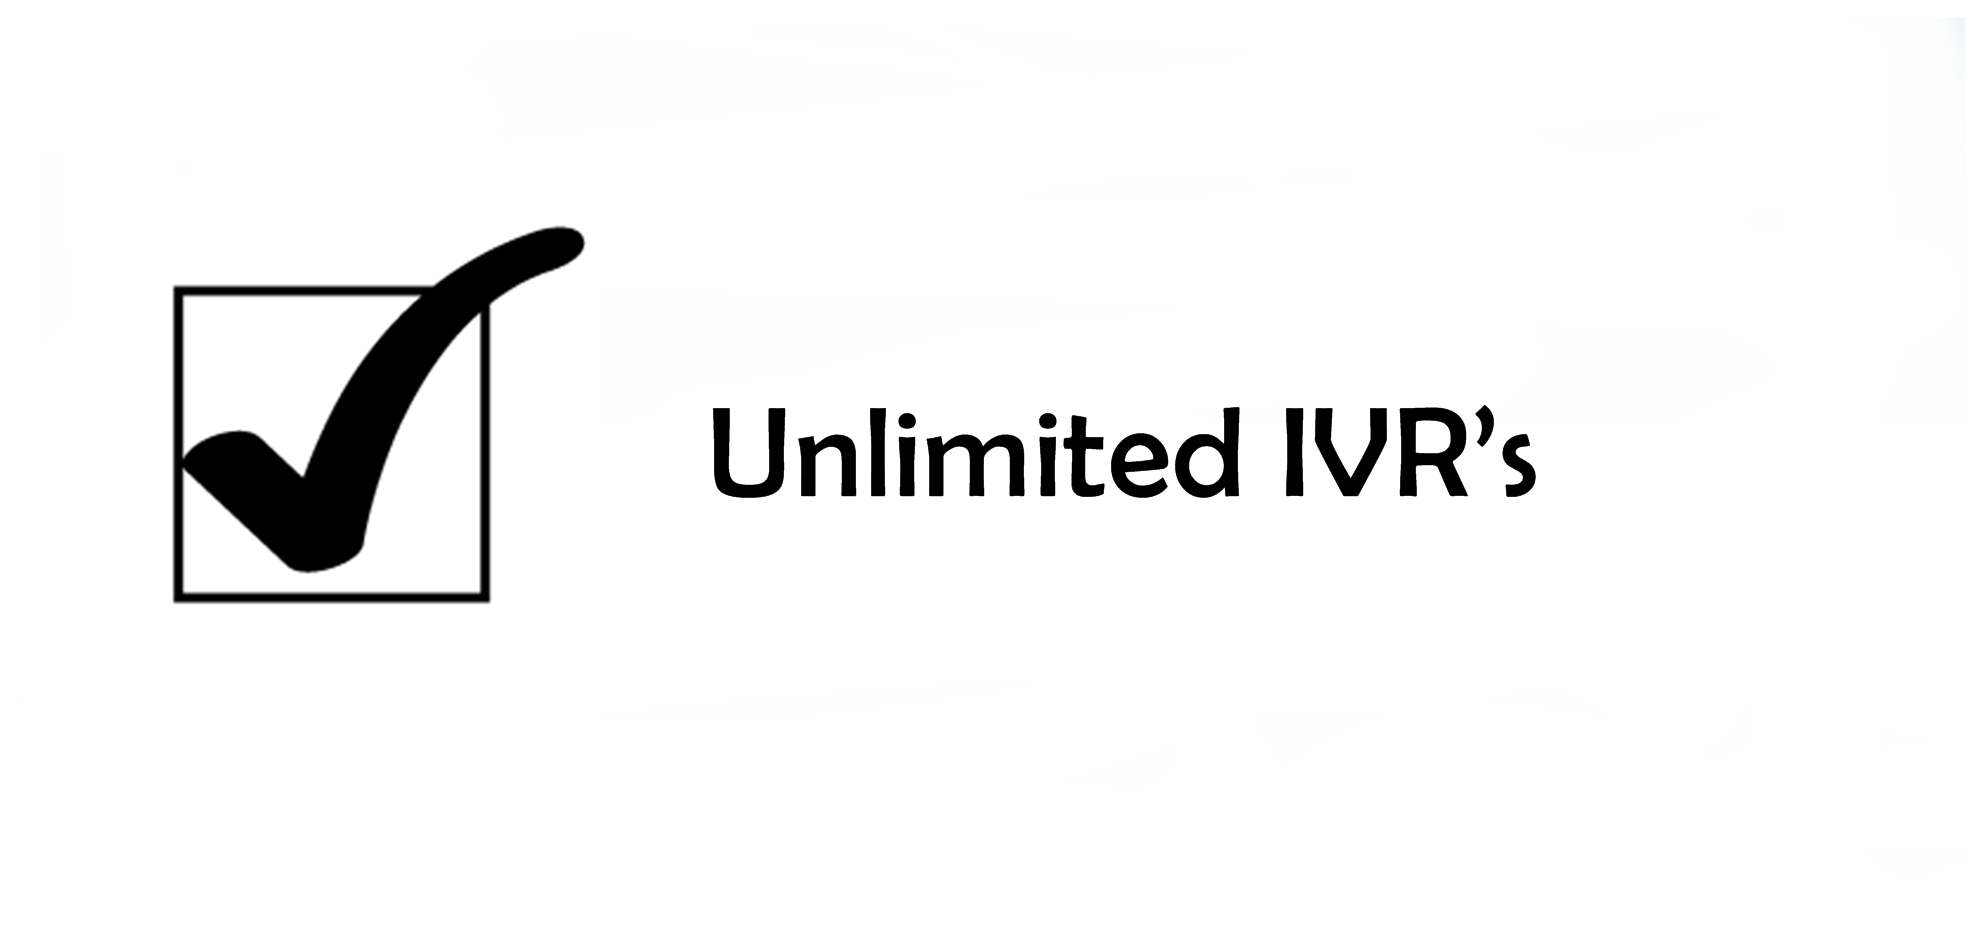 Unlimited IVR’s